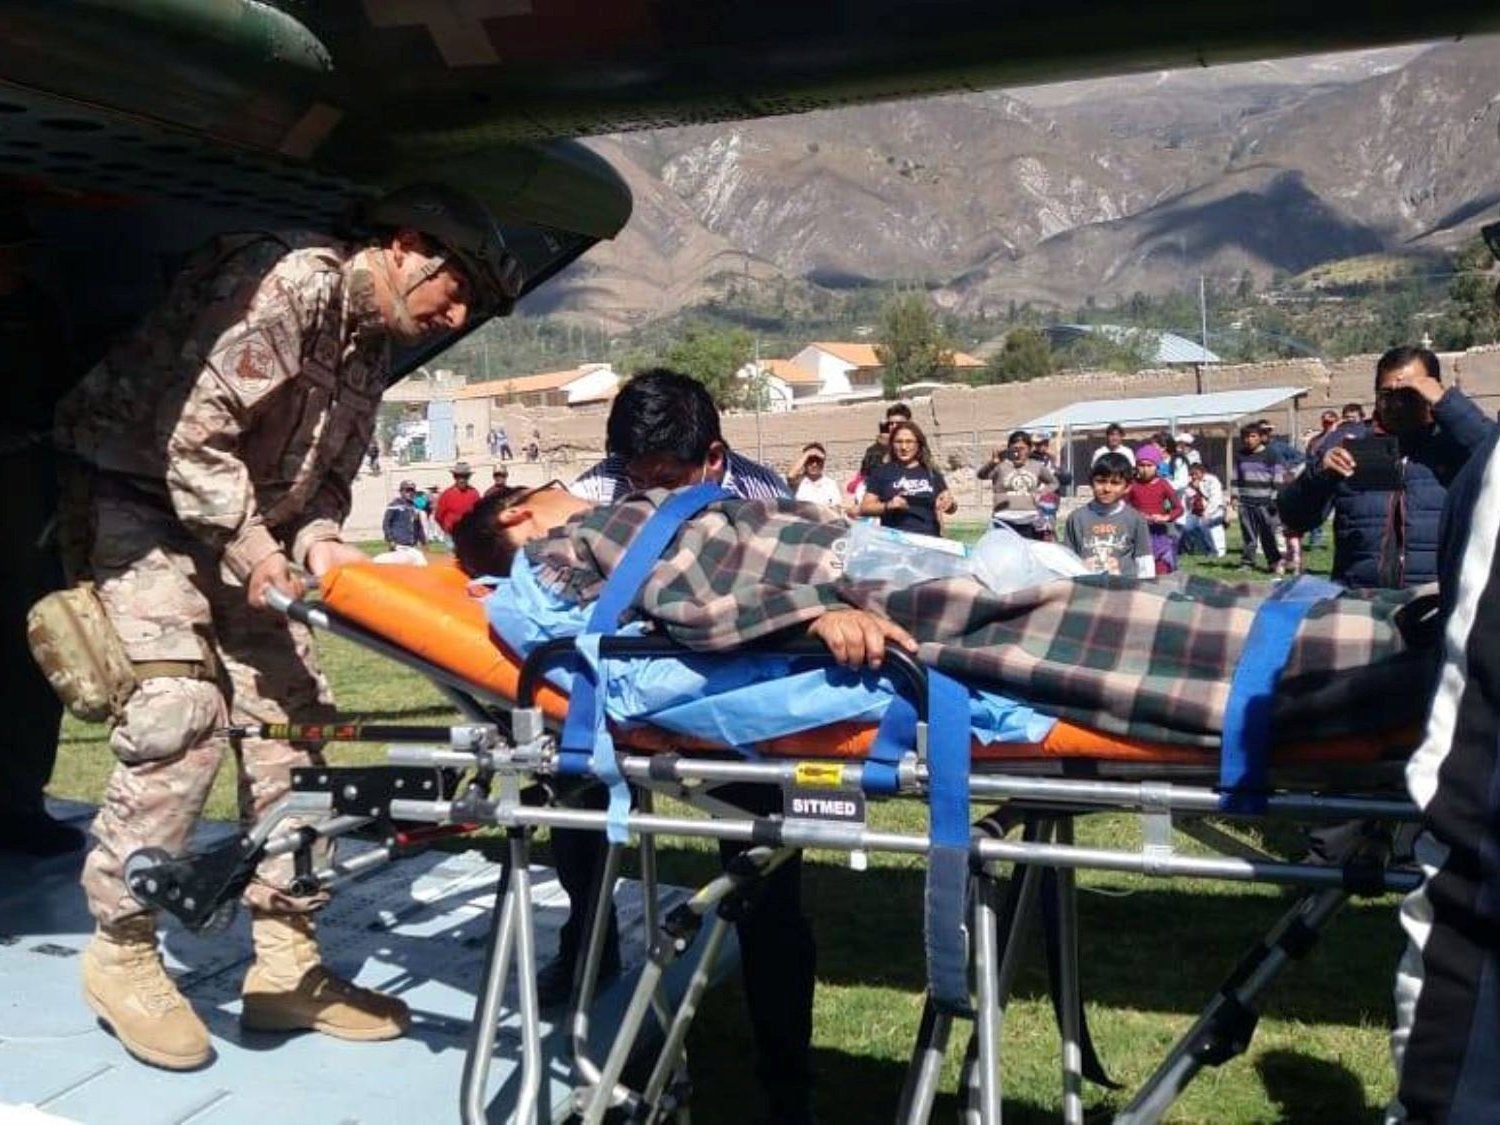 A person is transported to a helicopter after eating contaminated food at a funeral in the Peruvian Andes